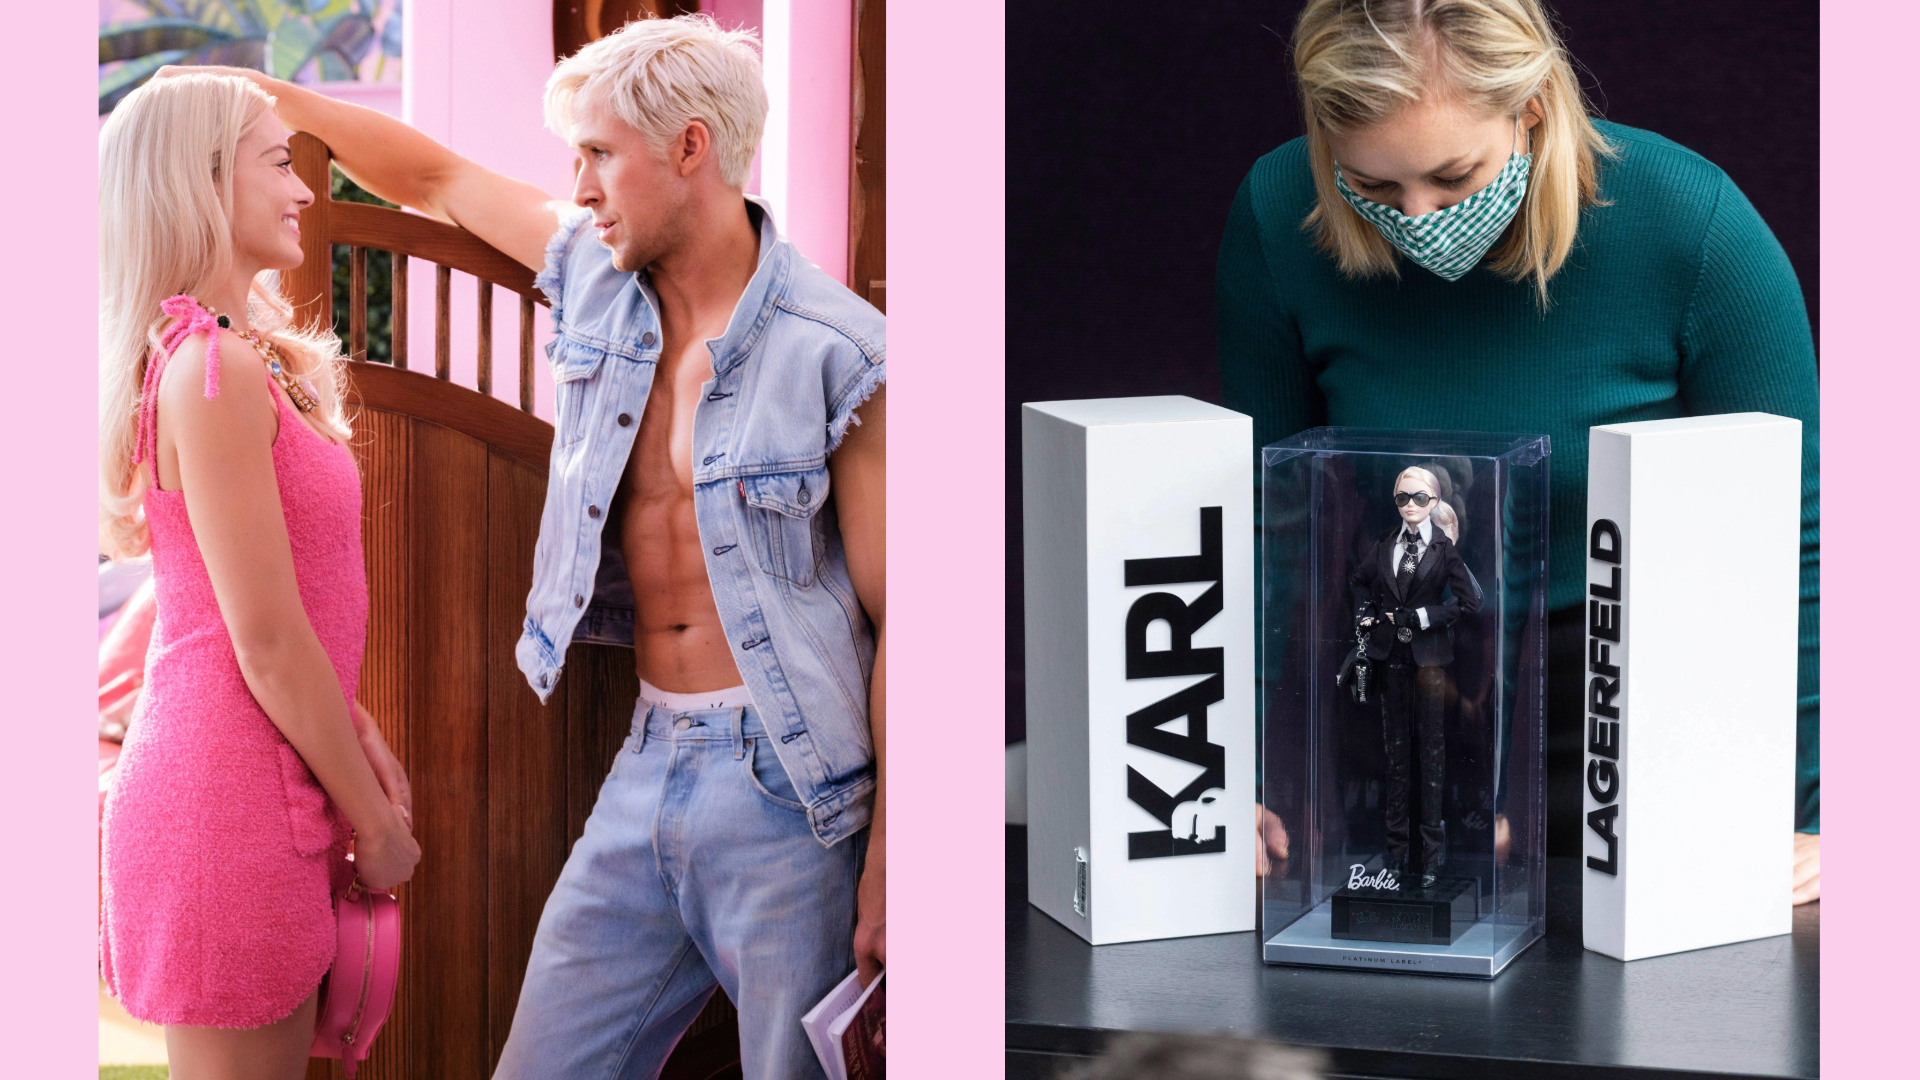 A photograph of Margot Robbie and Ryan Gosling as Barbie and Ken from the movie Barbie next to a photo of a woman wearing a surgical mask leaning over a special Barbie made for Chanel in honour of the designer Karl Lagerfield